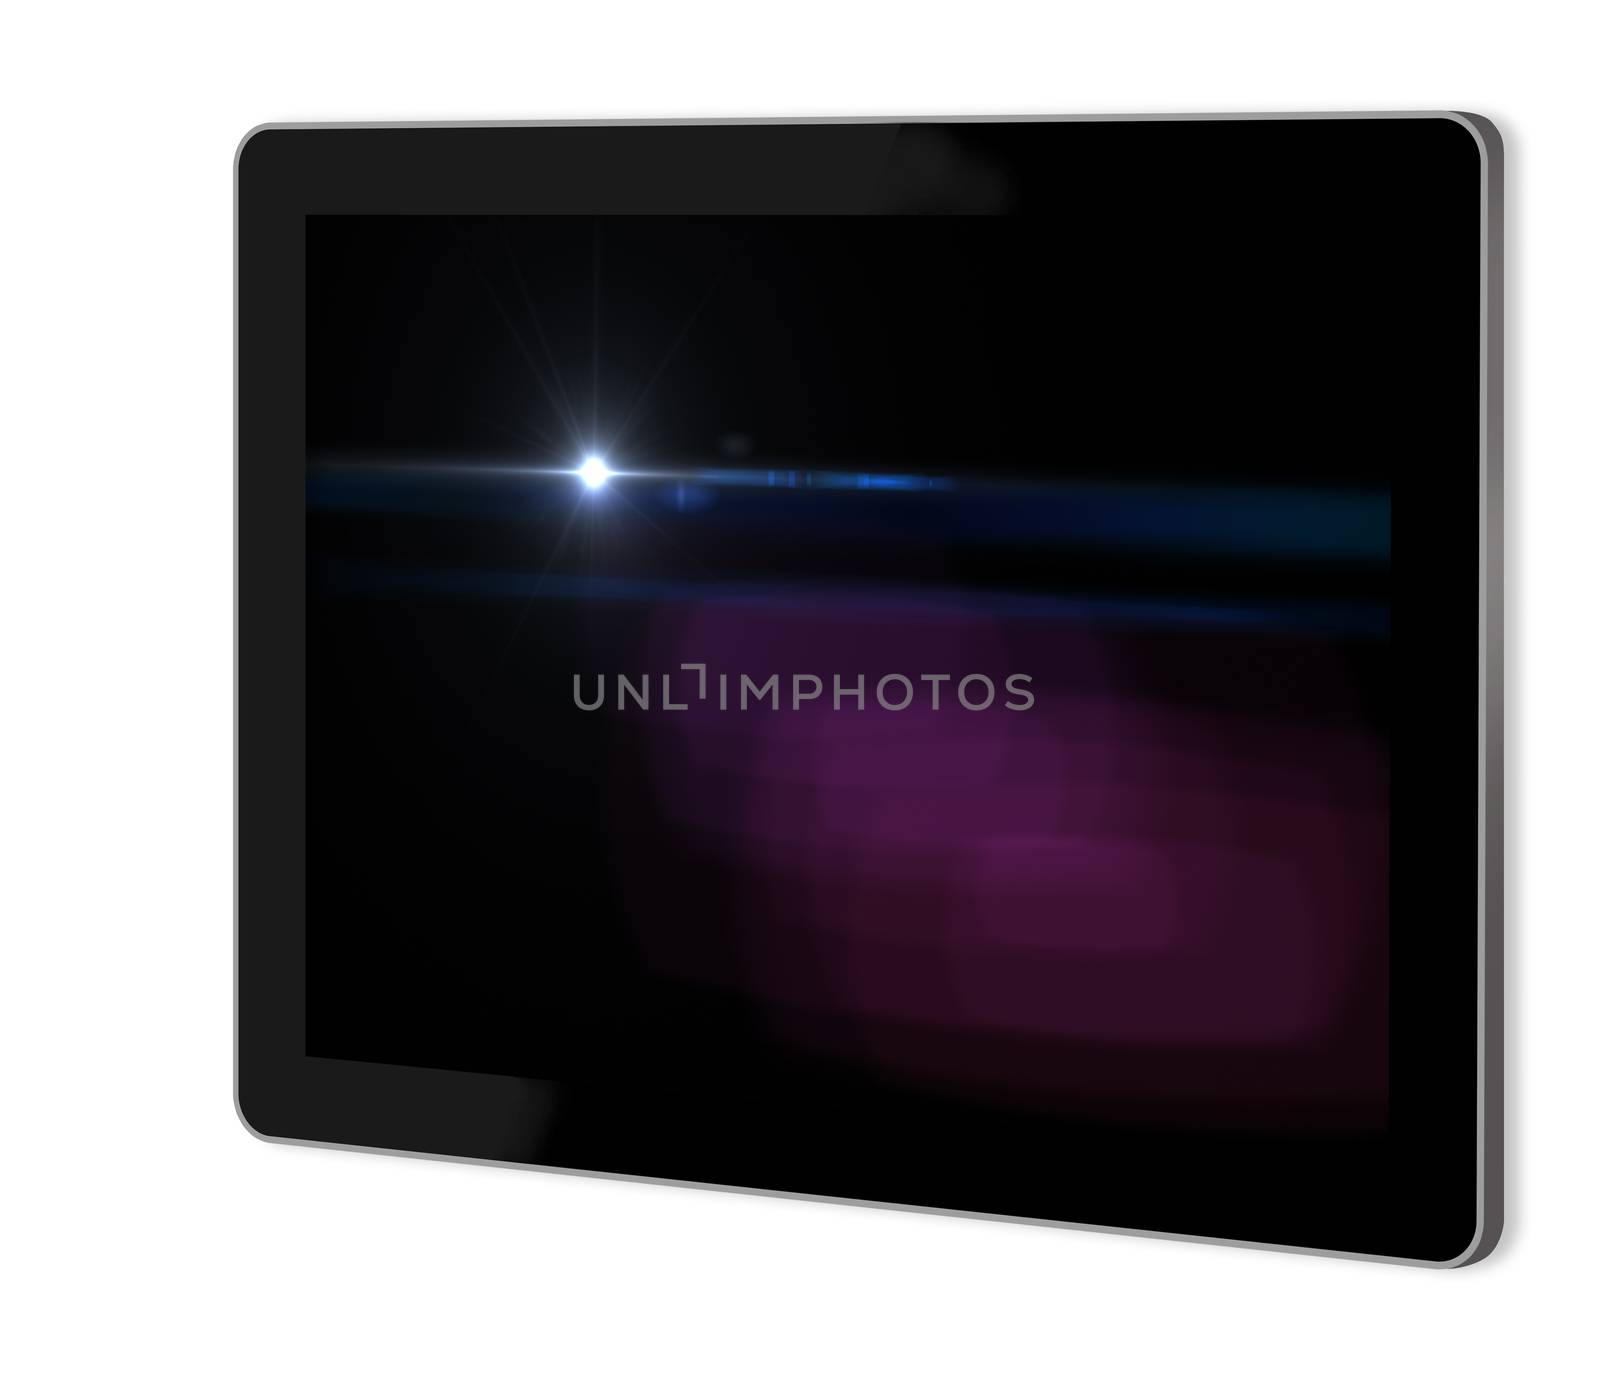 Lens flare effect in  space  on screen of tablet  made in 3d software